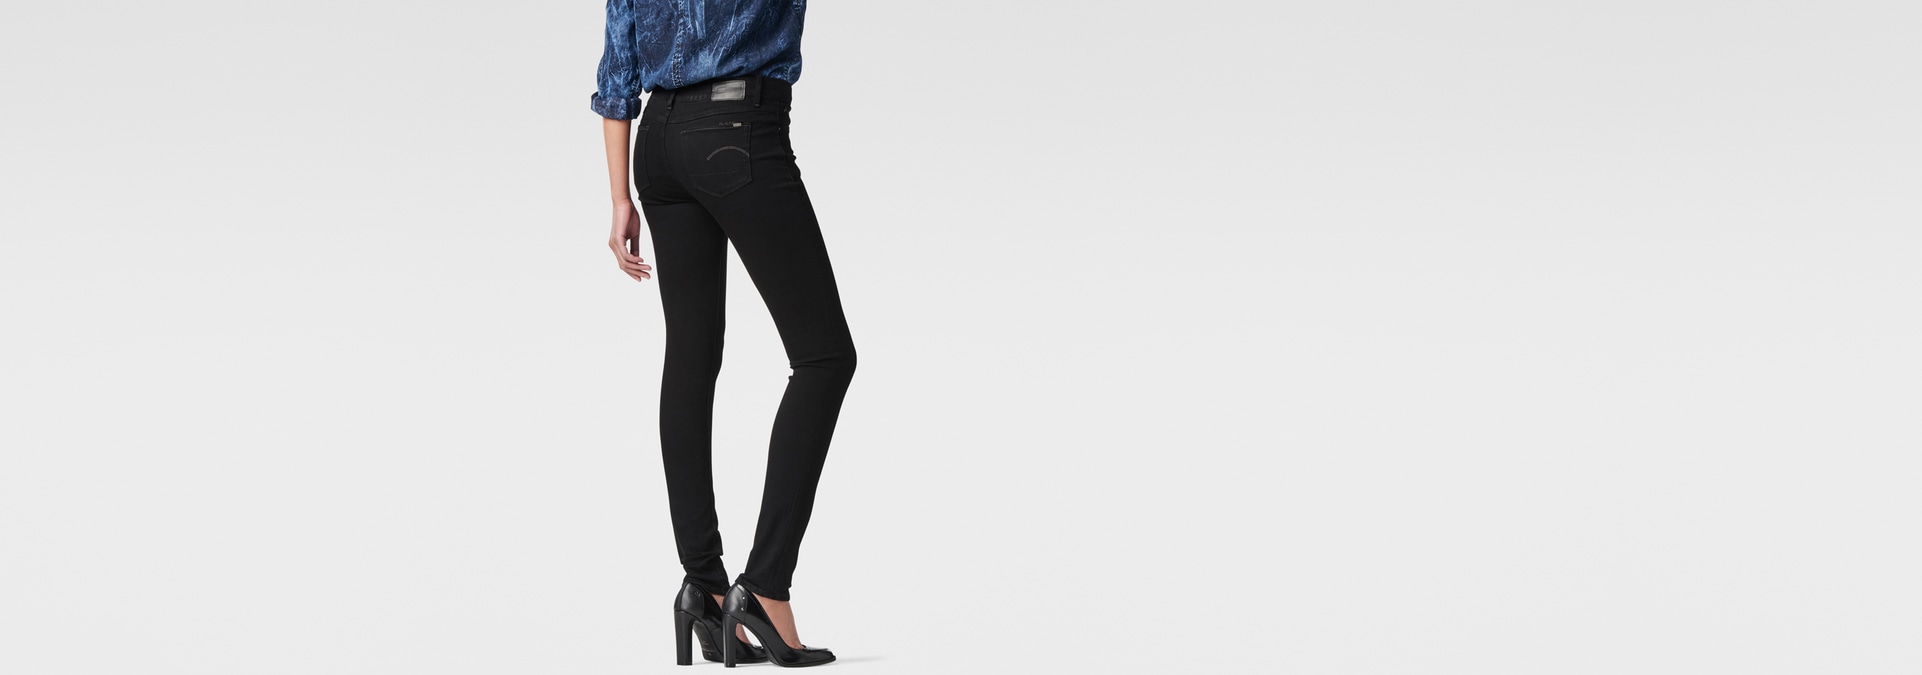 G-Star RAW | Women | Jeans | 3301 Contour High Waist Skinny Jeans , Rinsed